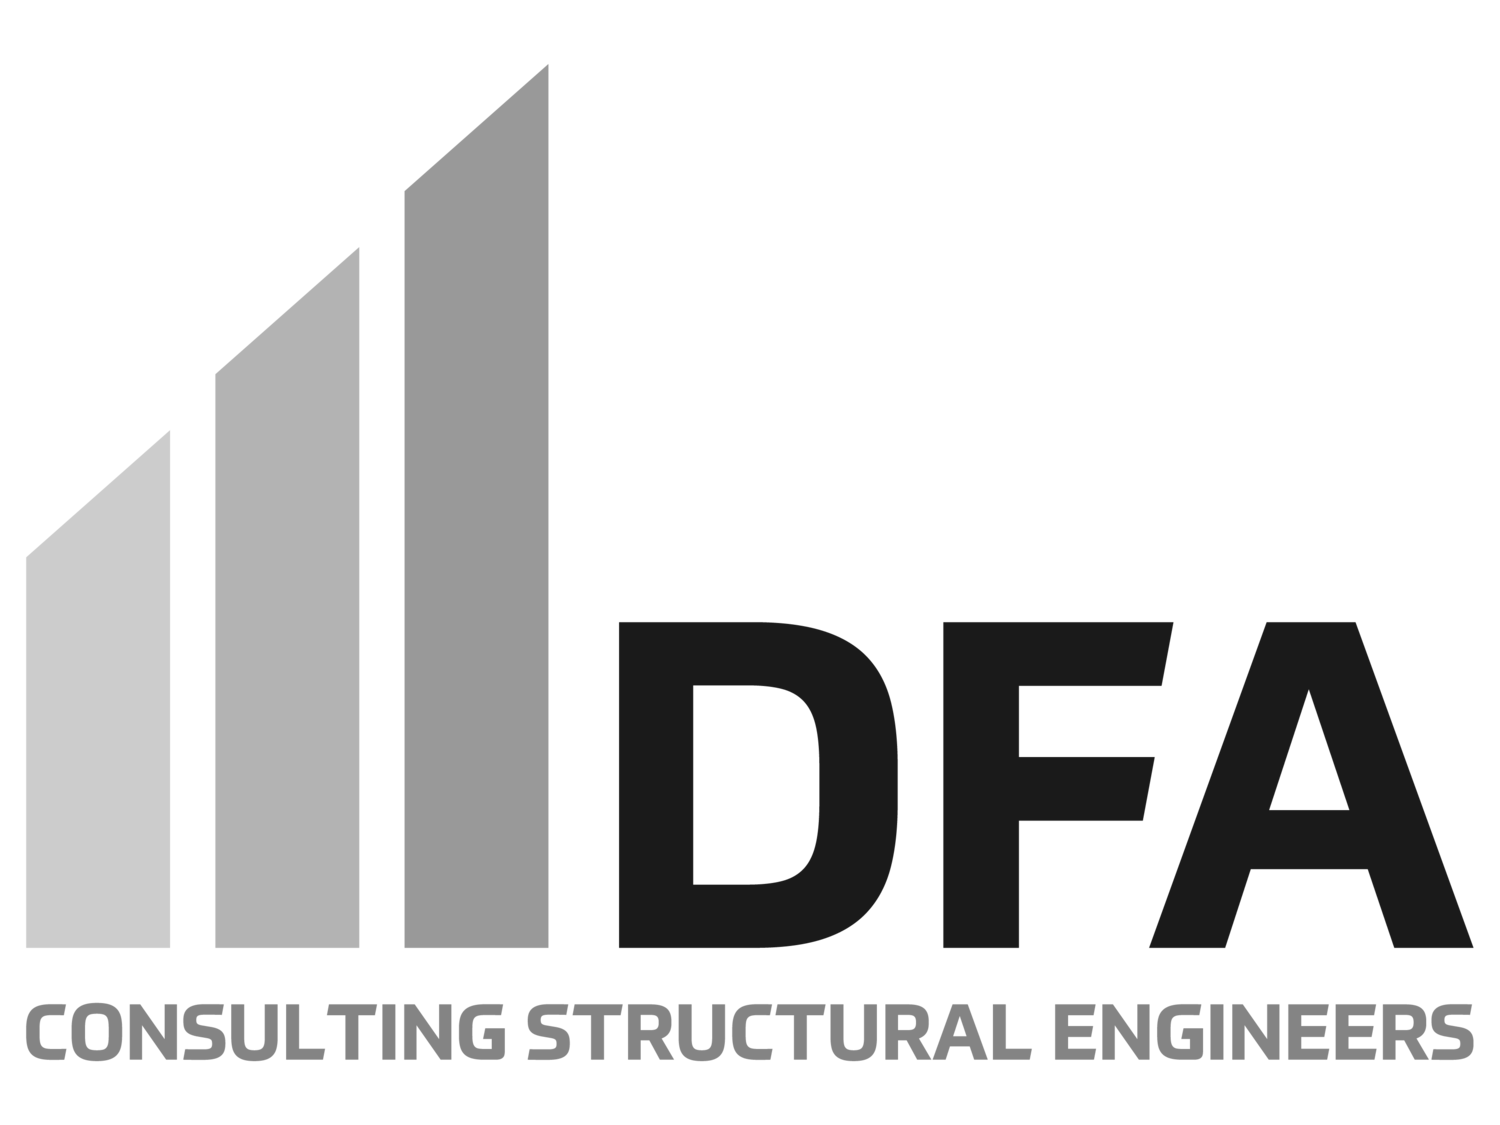 Darin Fong and Associates Inc. Consulting Structural Engineers